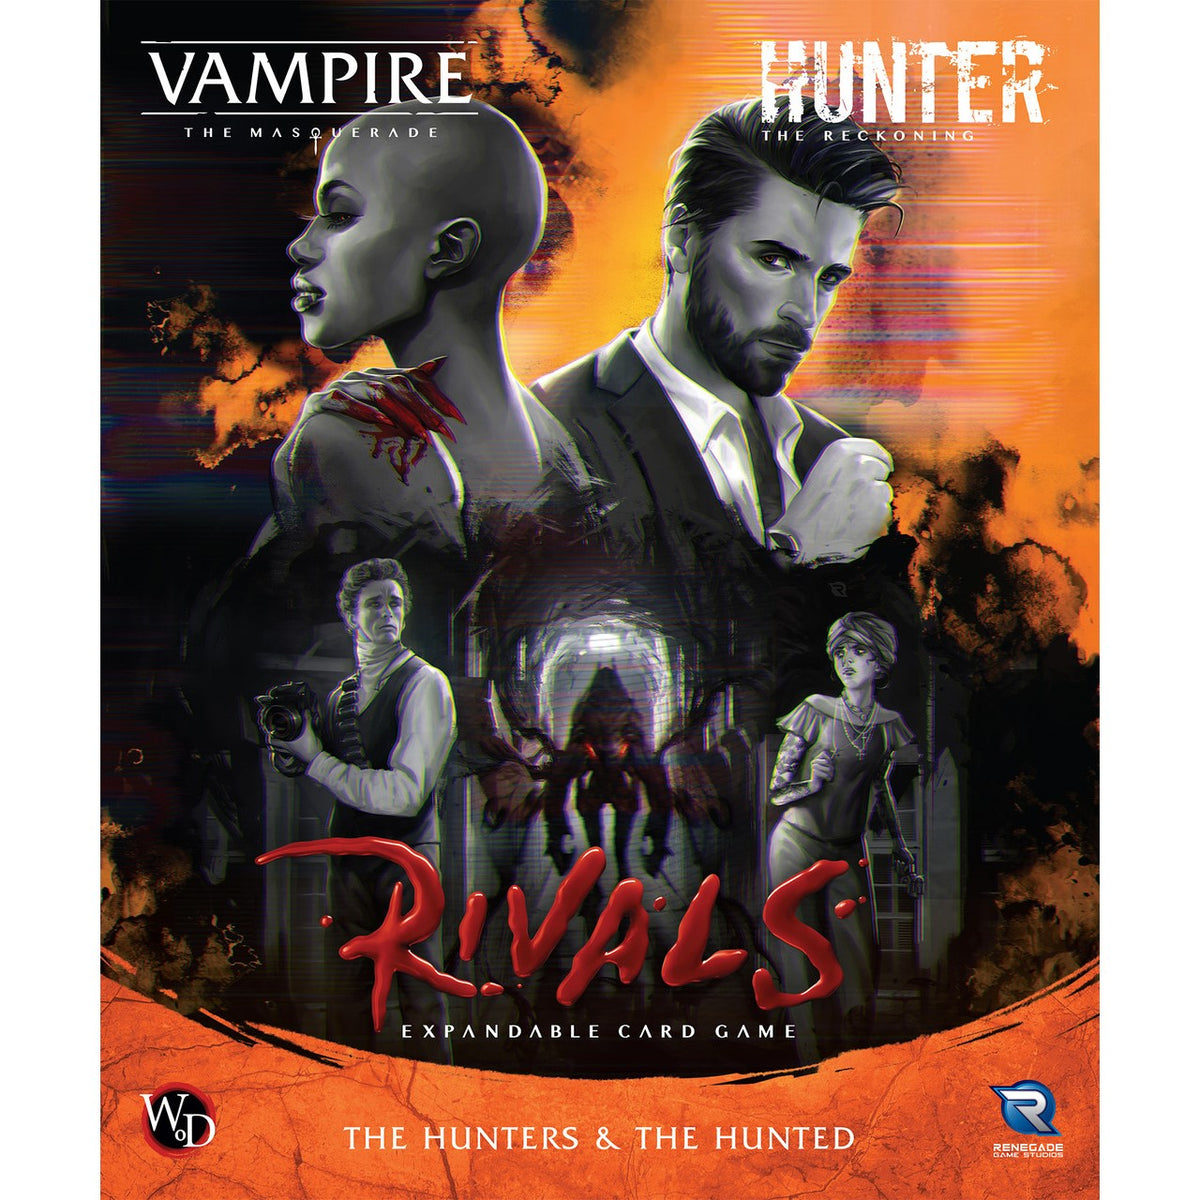 Vampire: The Masquerade Rivals Expandable Card Game - The Hunters &amp; The Hunted